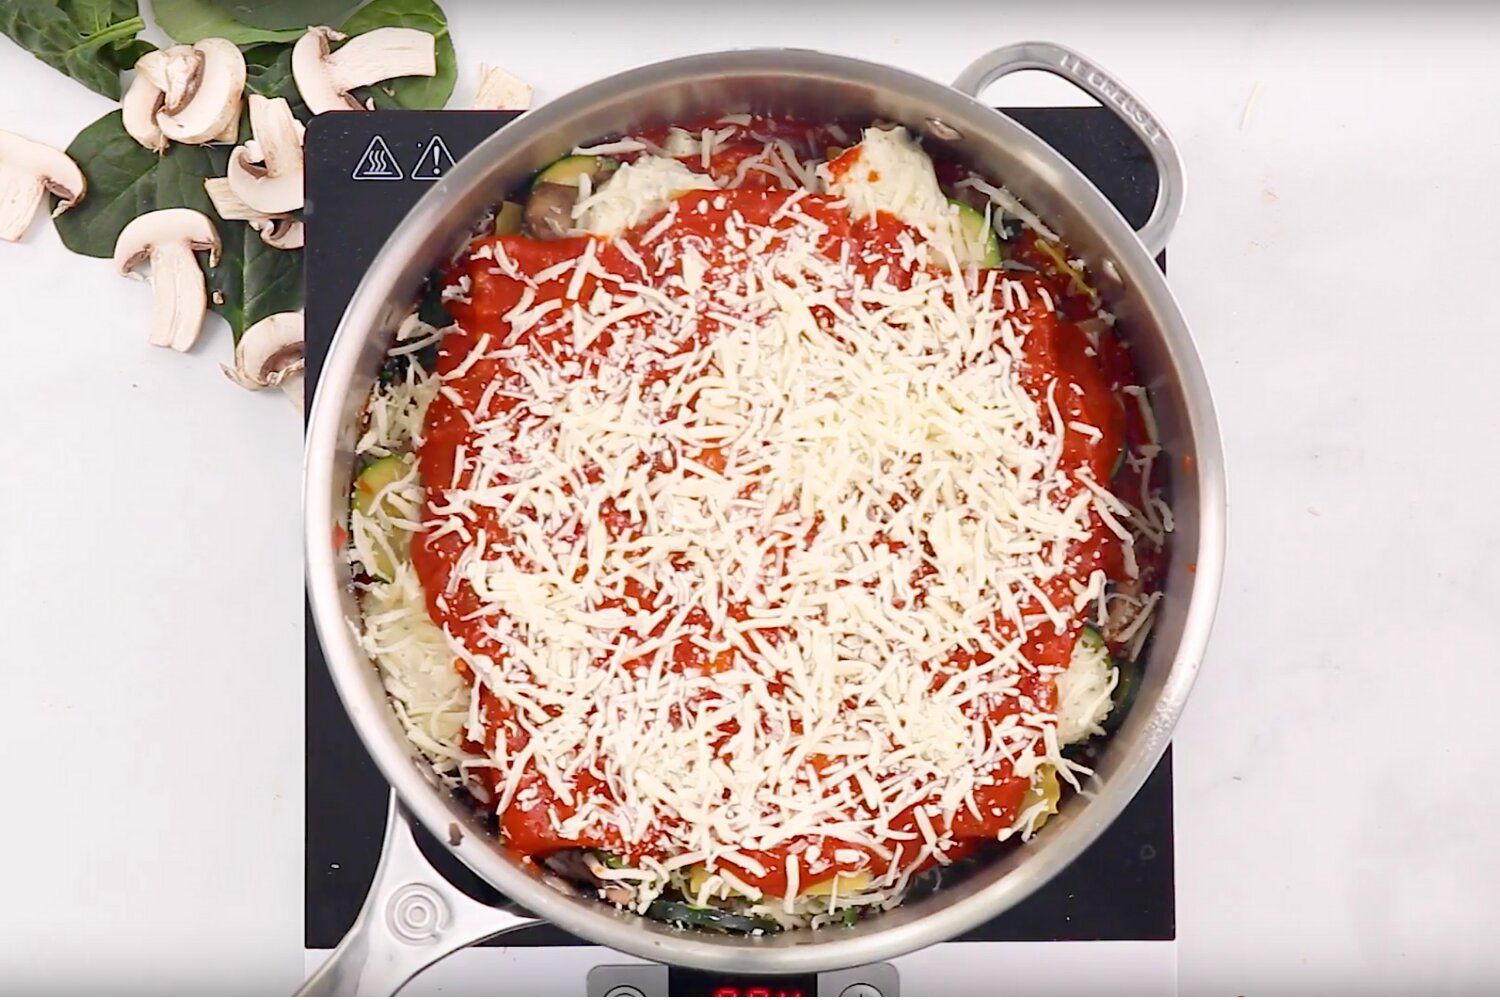 Skillet lasagna in a skillet with layers of noodles, vegetables, ricotta, mozzarella, and sauce.